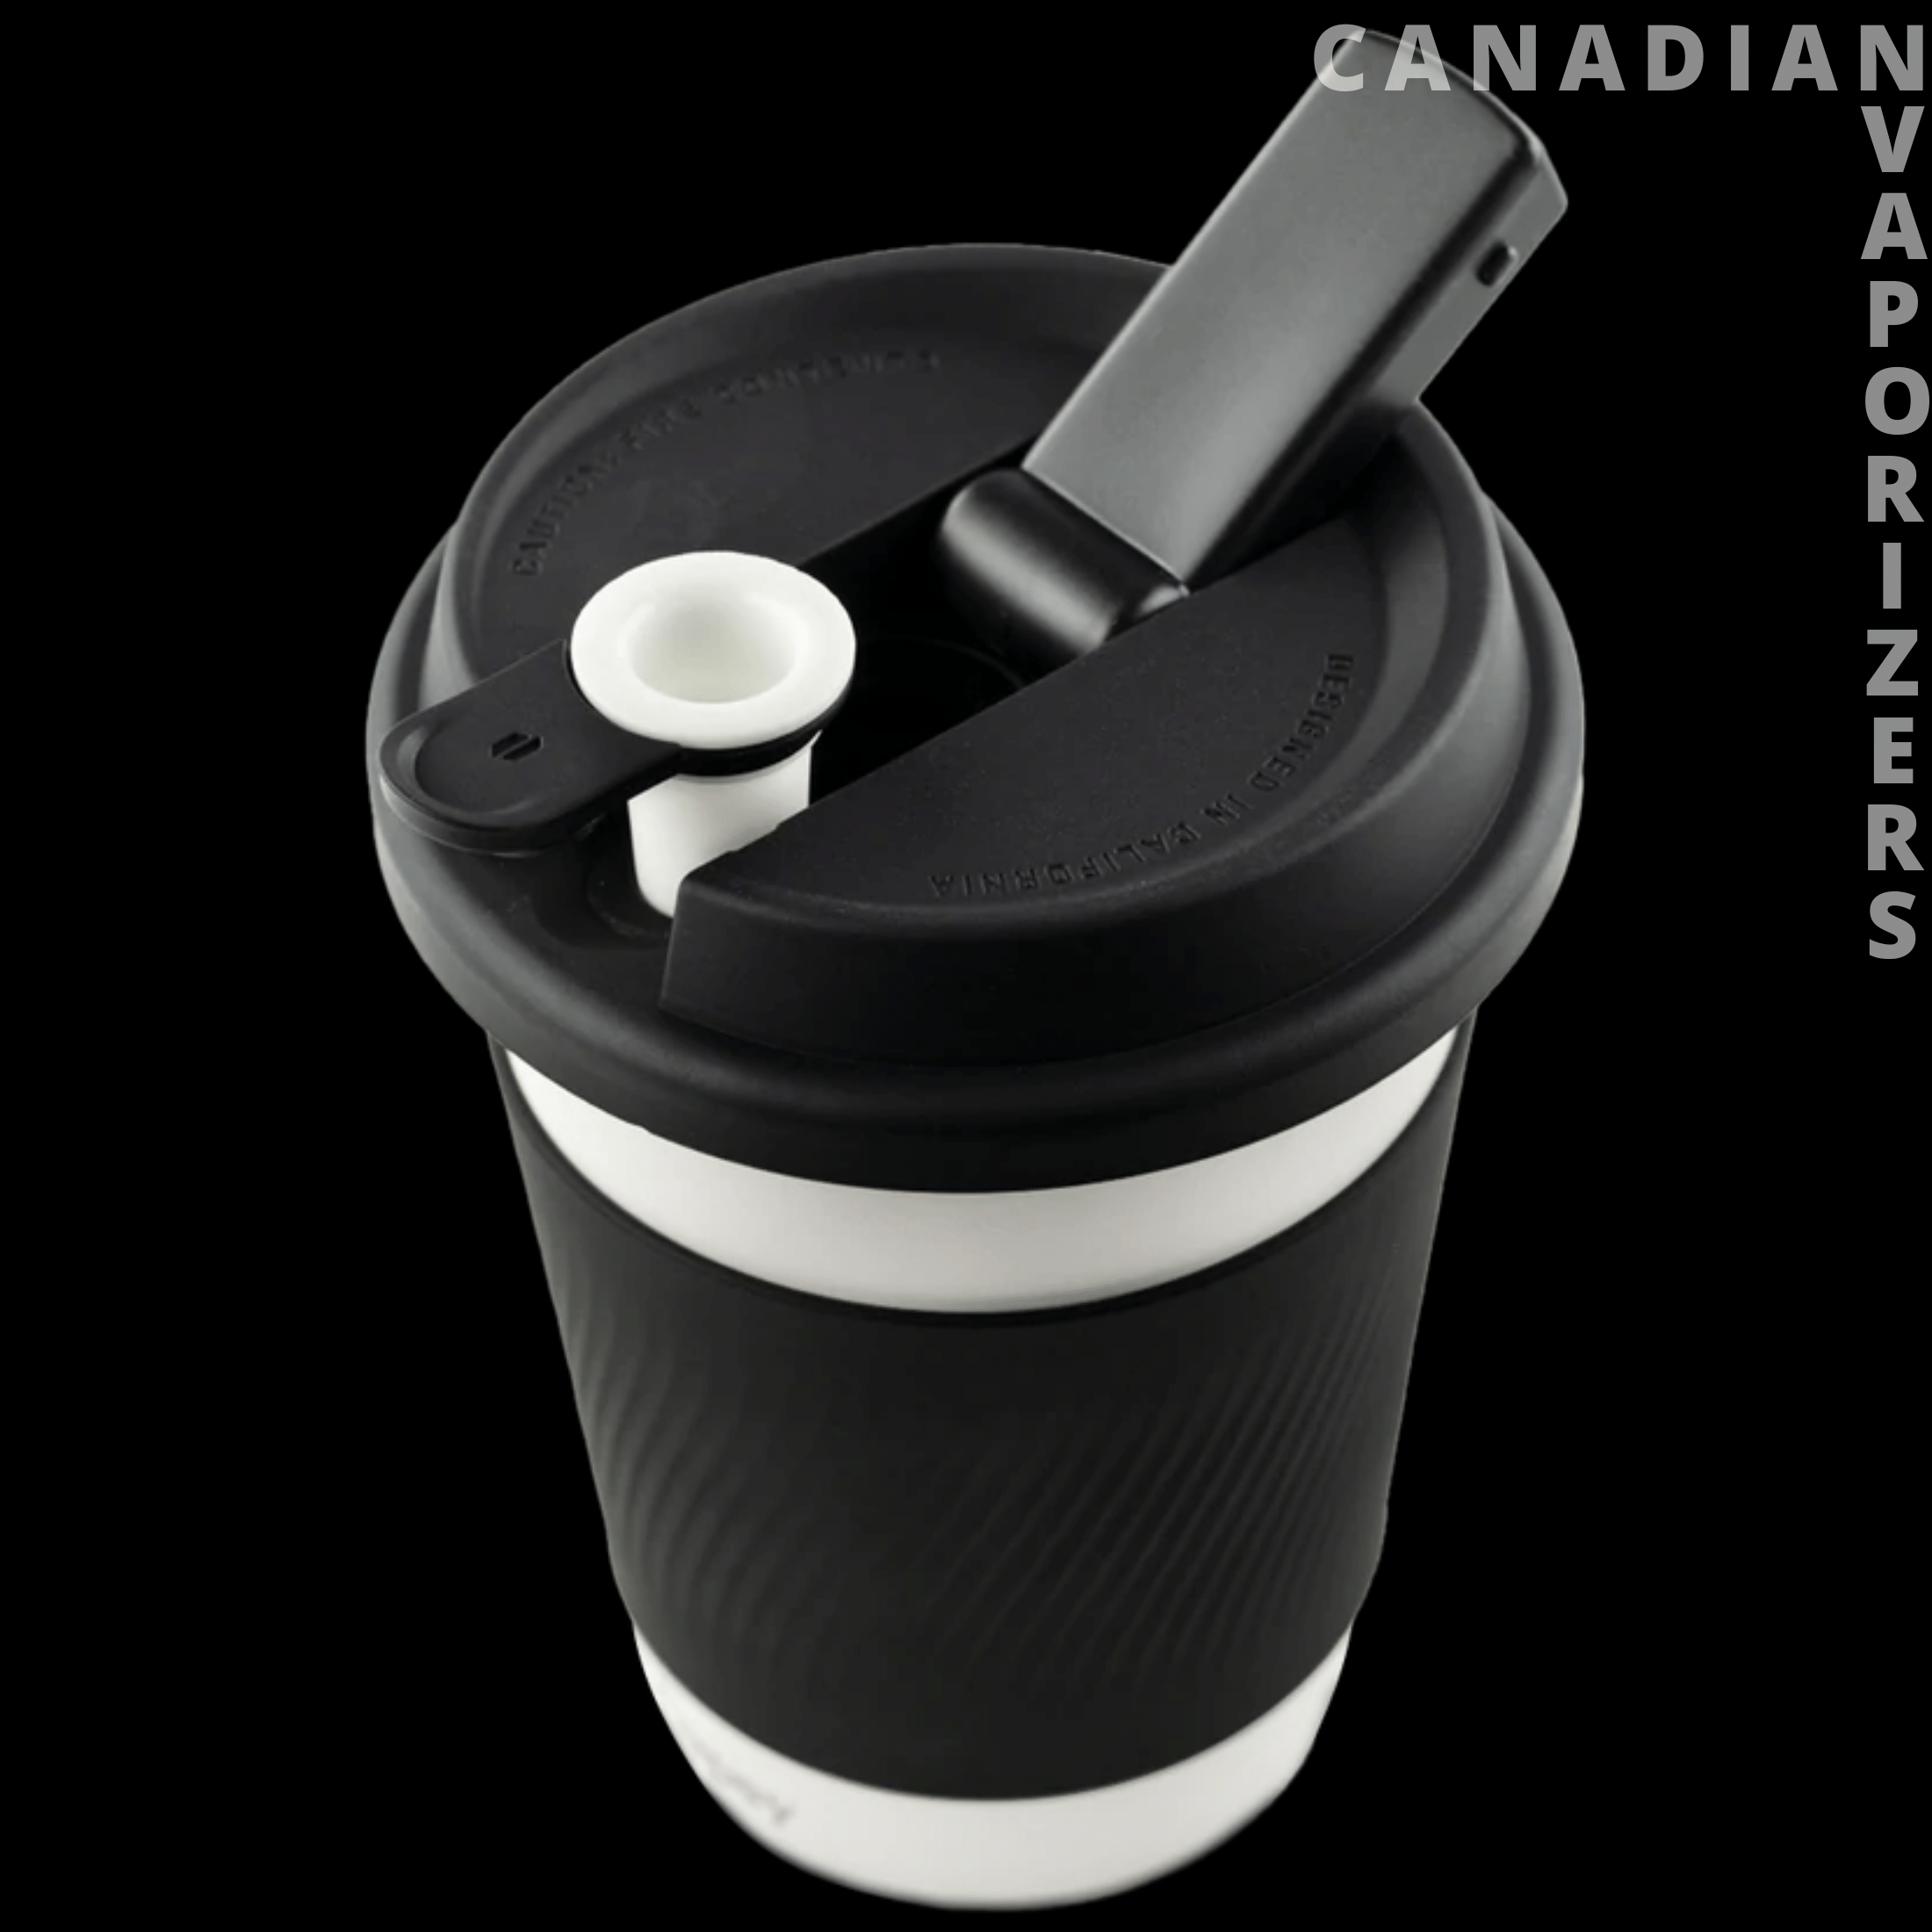 The Cupsy: Our Discreet Coffee Cup Pipe